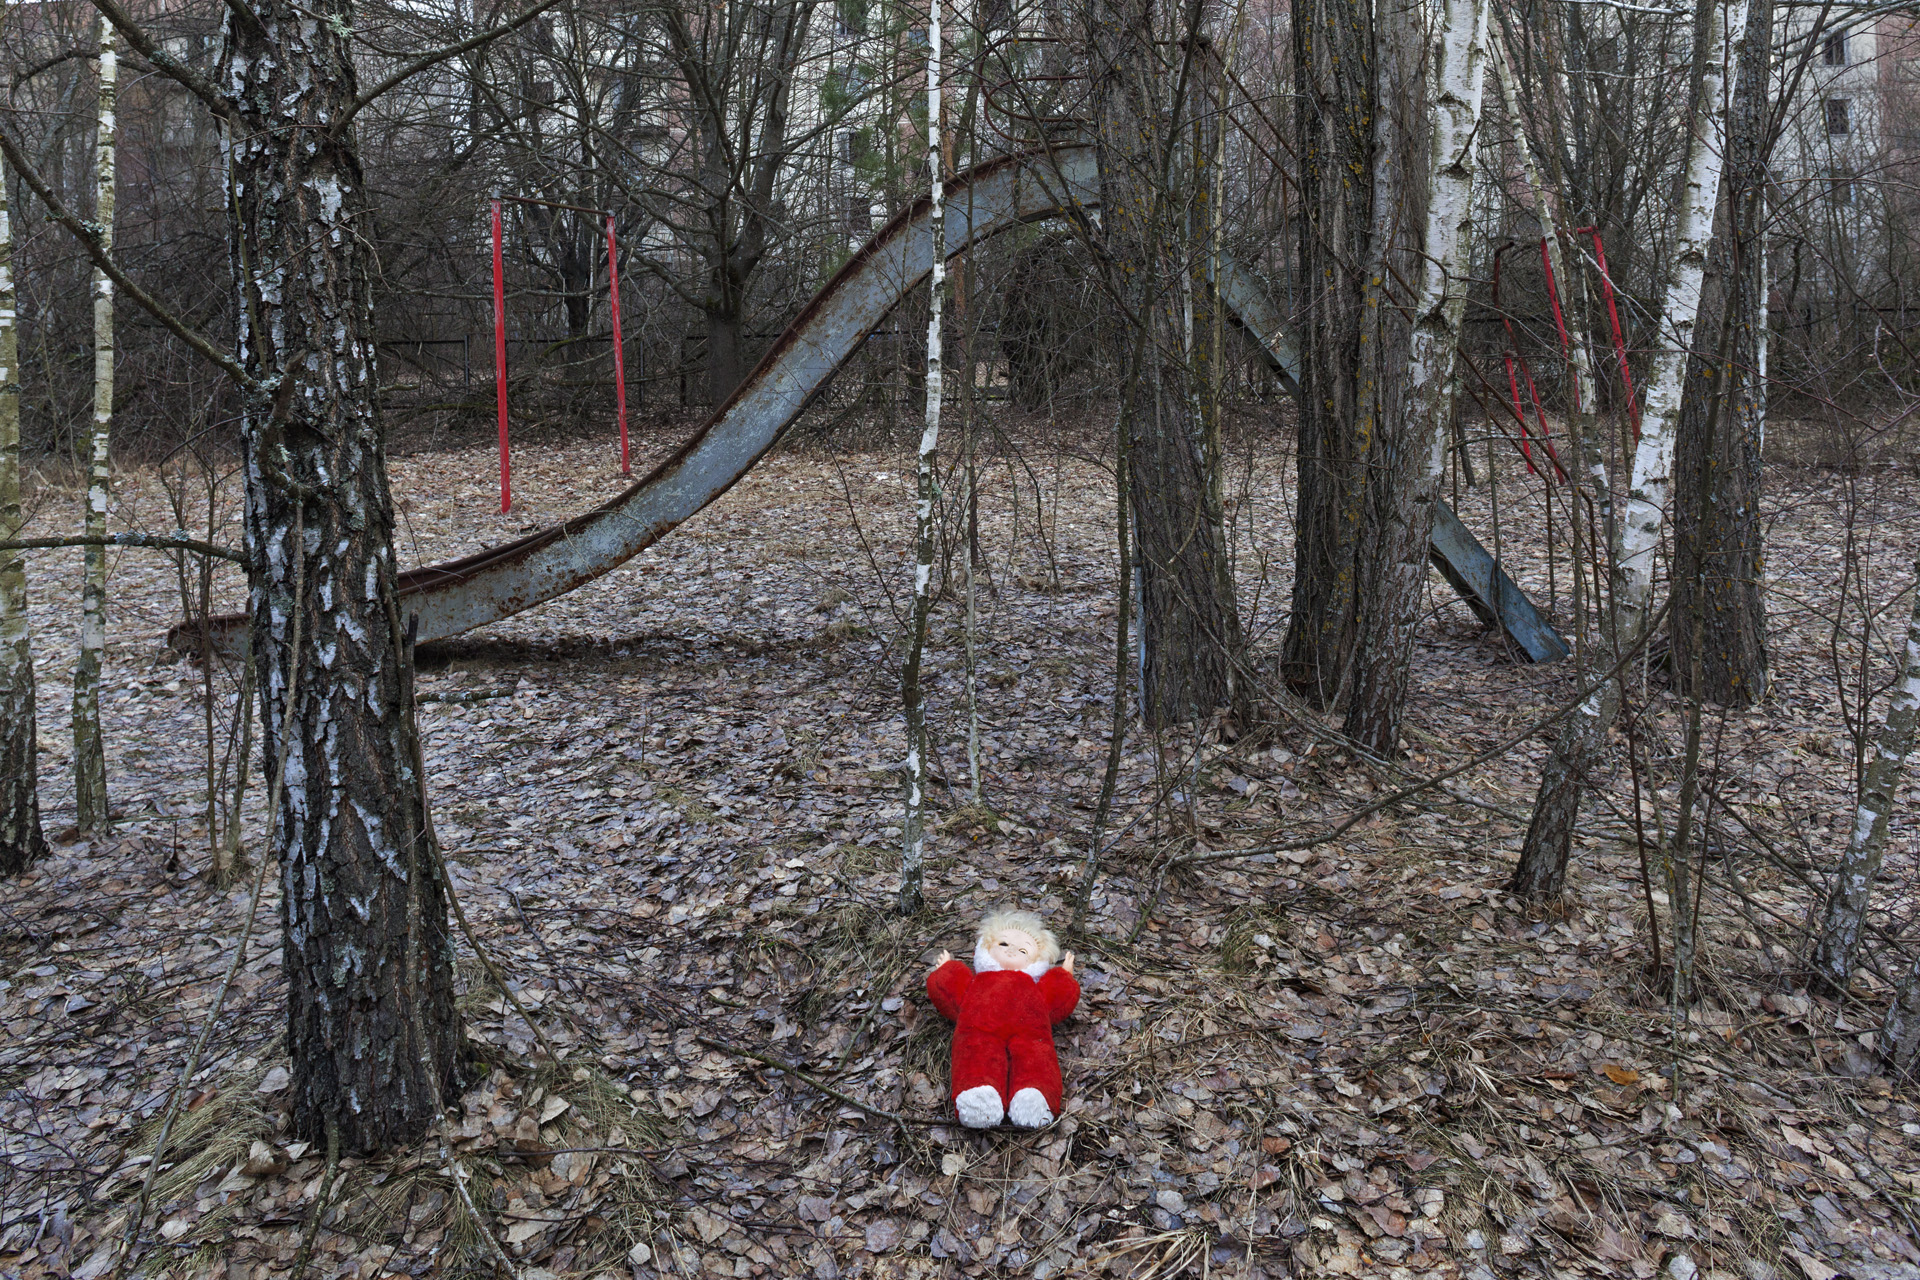  The abandoned, lonely doll, neatly arranged, has become a standard tourist motif and an obvious indication that visitors were here.  Pripyat, Ukraine  